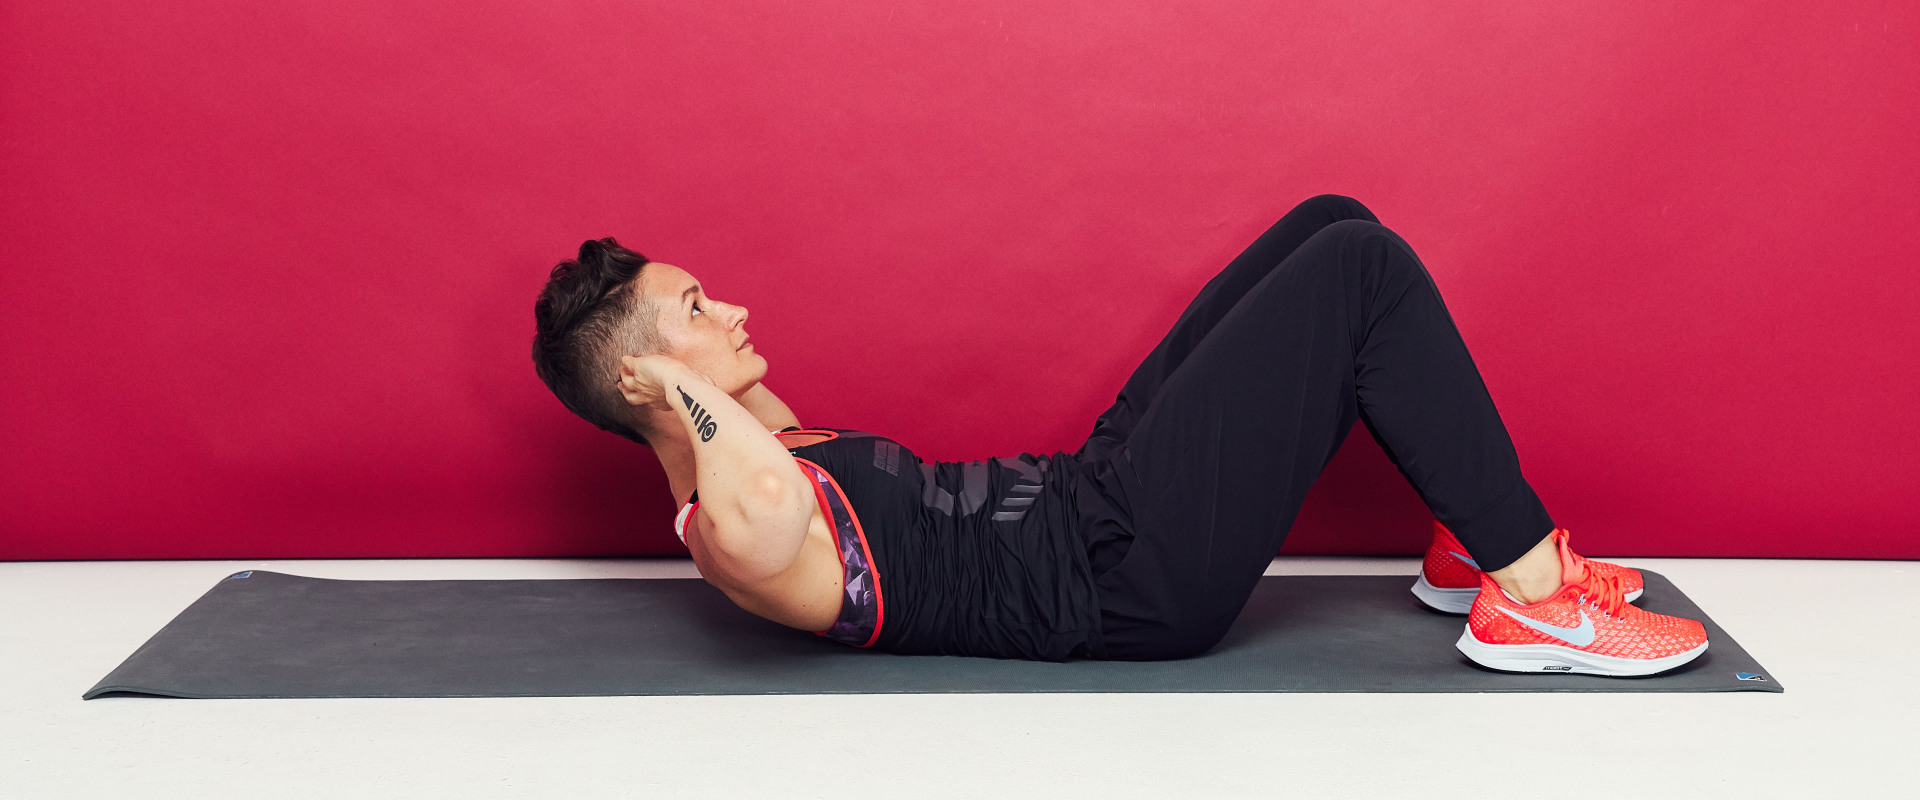 Crunches: Everything You Need to Know